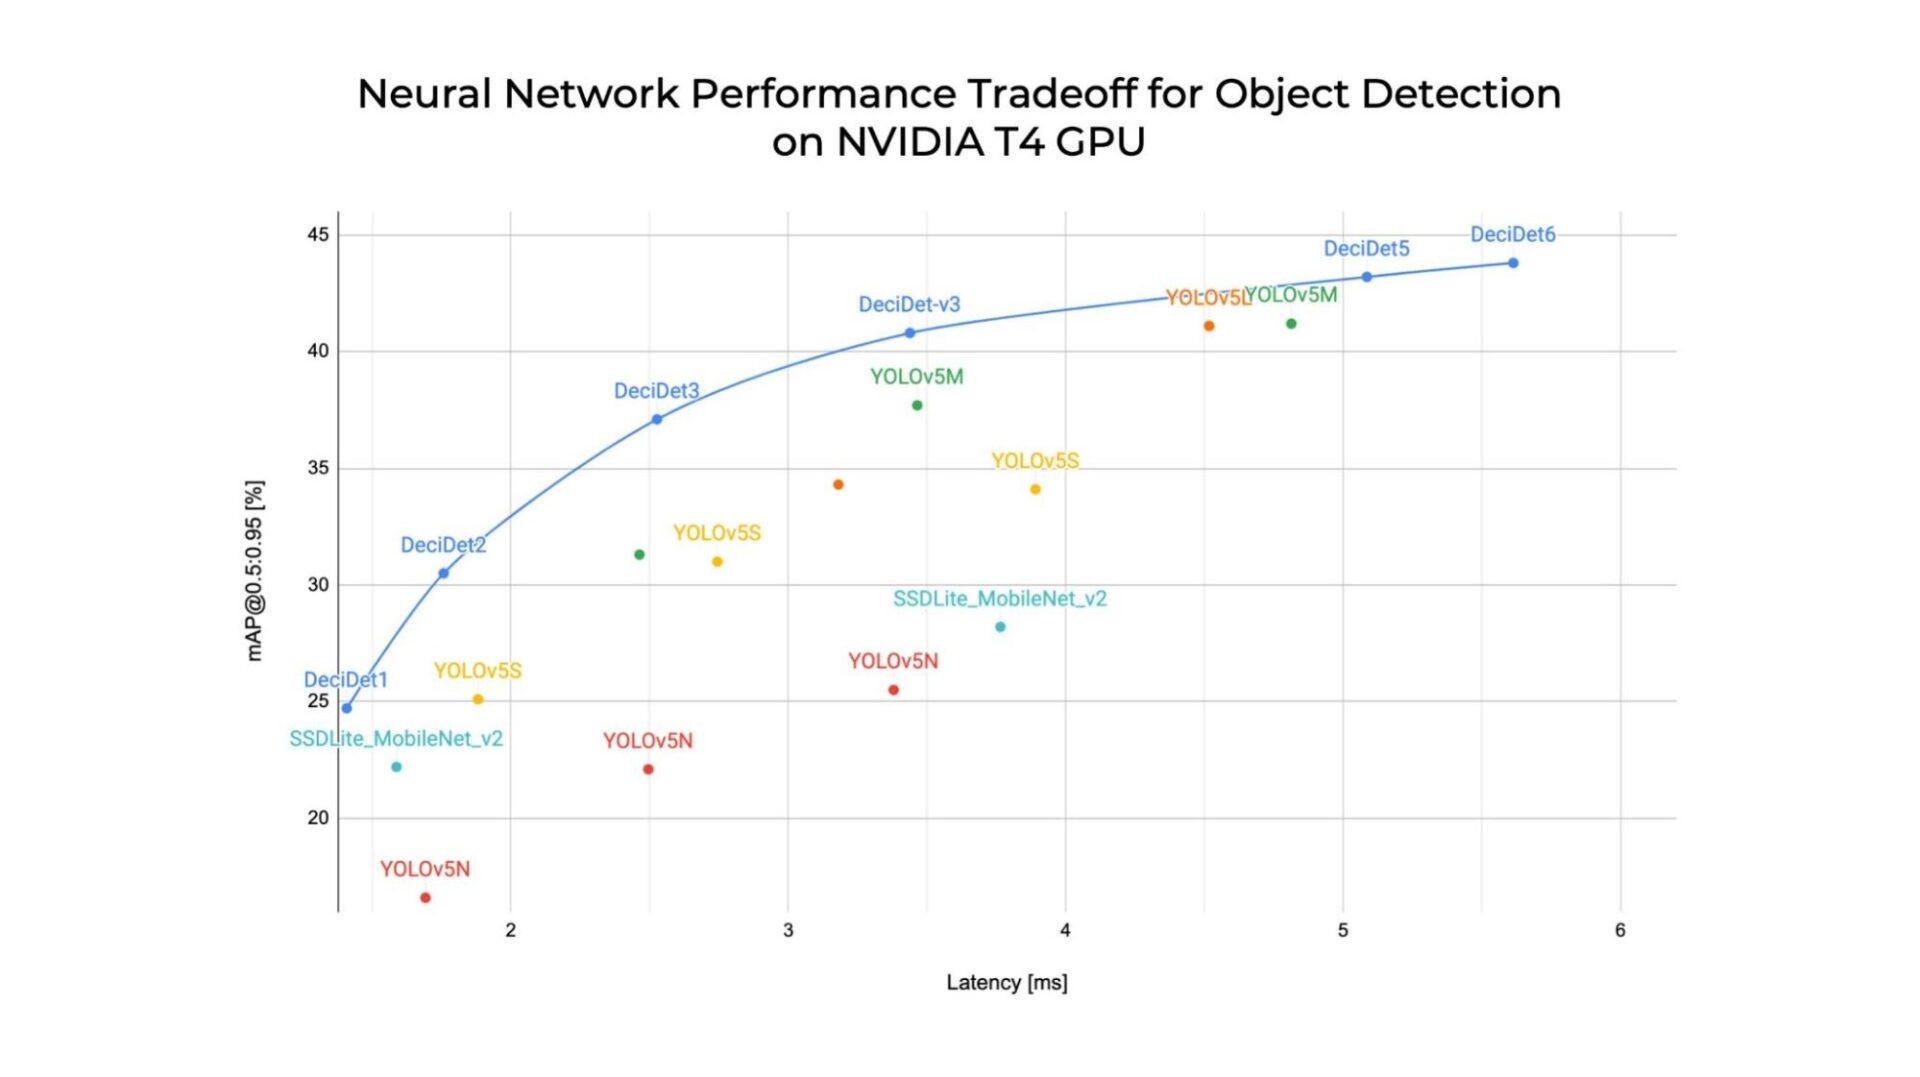 A graph showing neural network performance tradeoff for object detection on NVIDIA T4